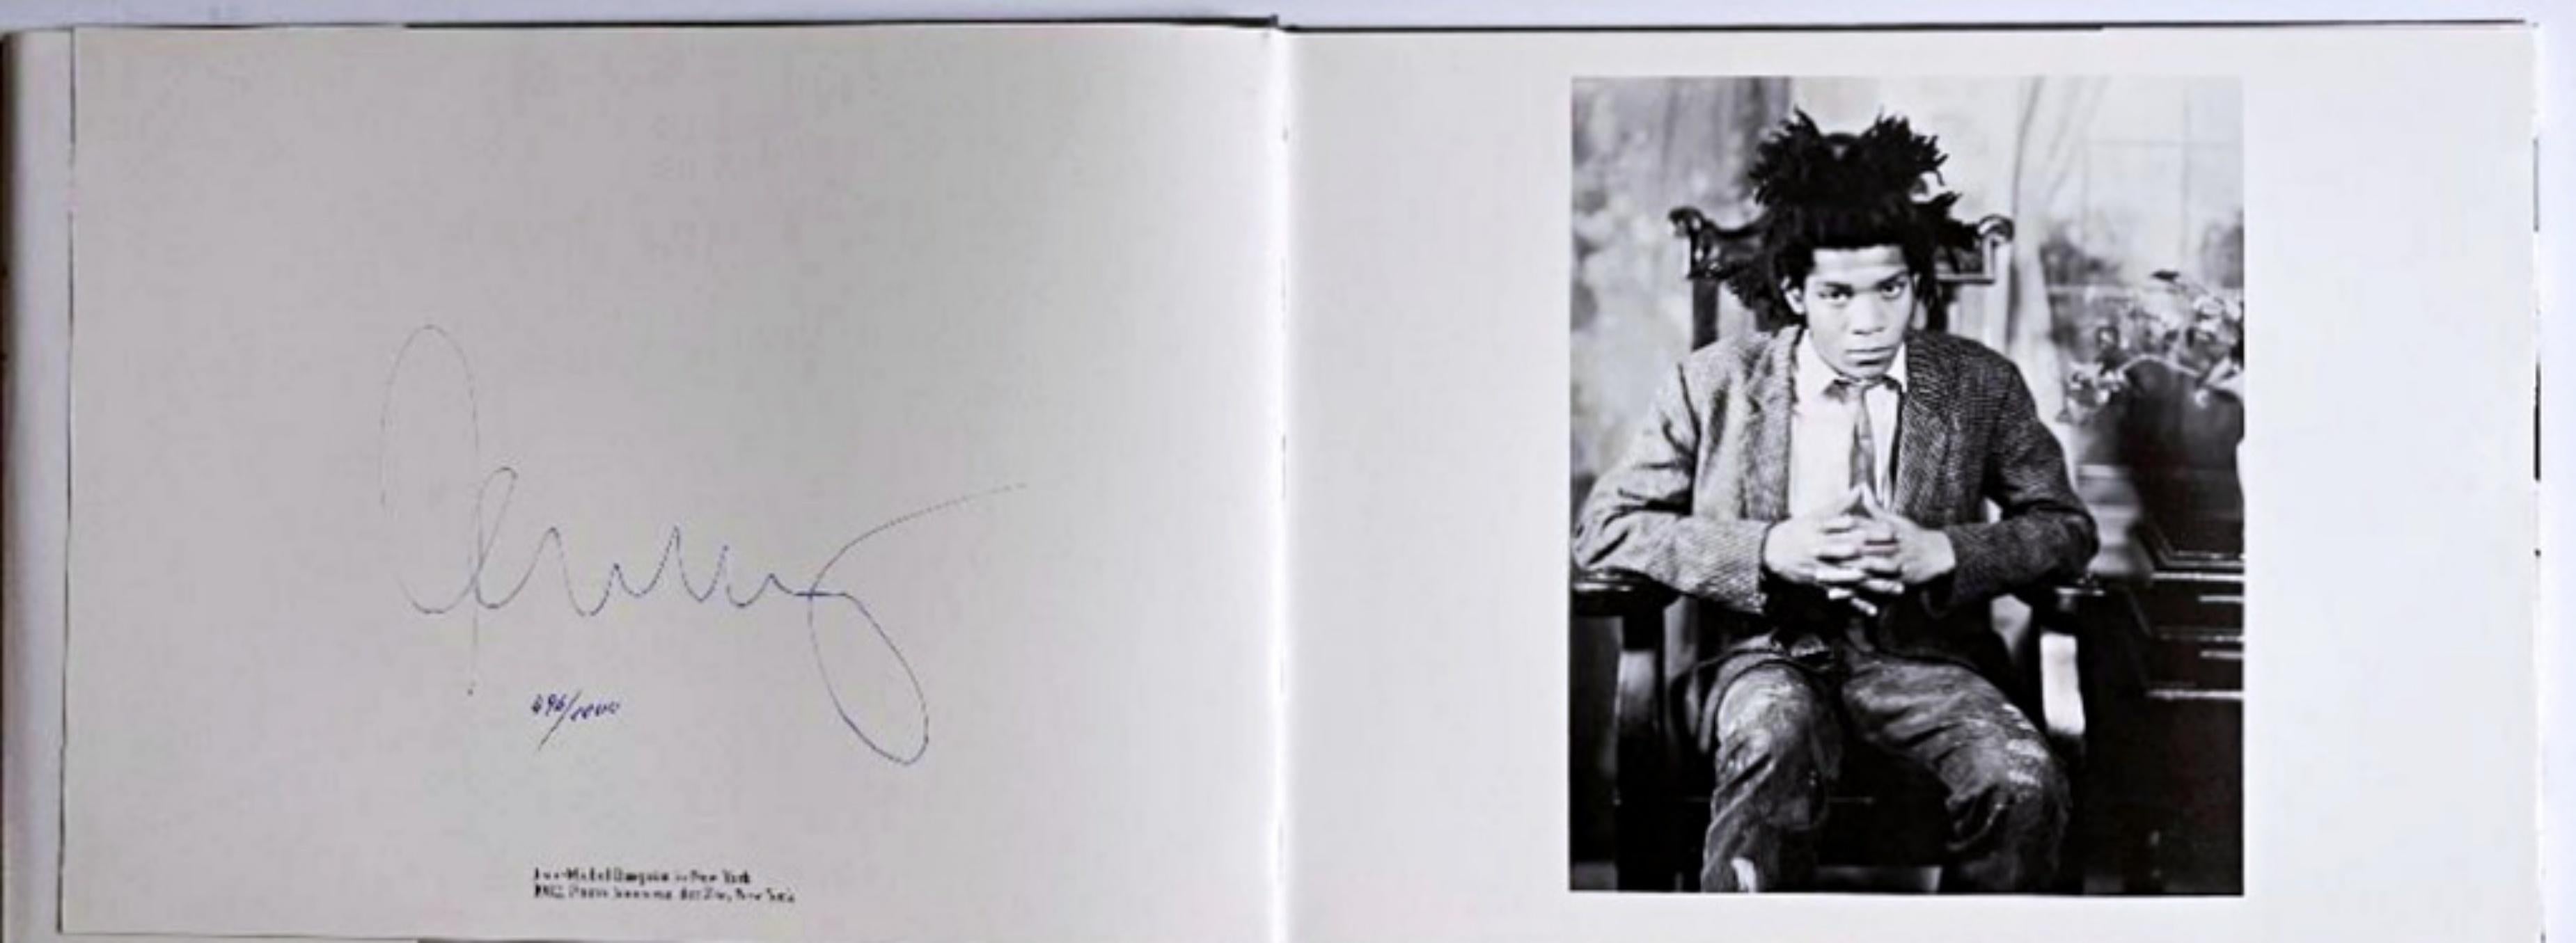 In July, 2022, another example of this rare, hand signed lifetime limited edition monograph (book) of offset lithographs, hand signed and numbered on the first front end page, sold at Sotheby's in London for approx US $40,000

This is a lifetime